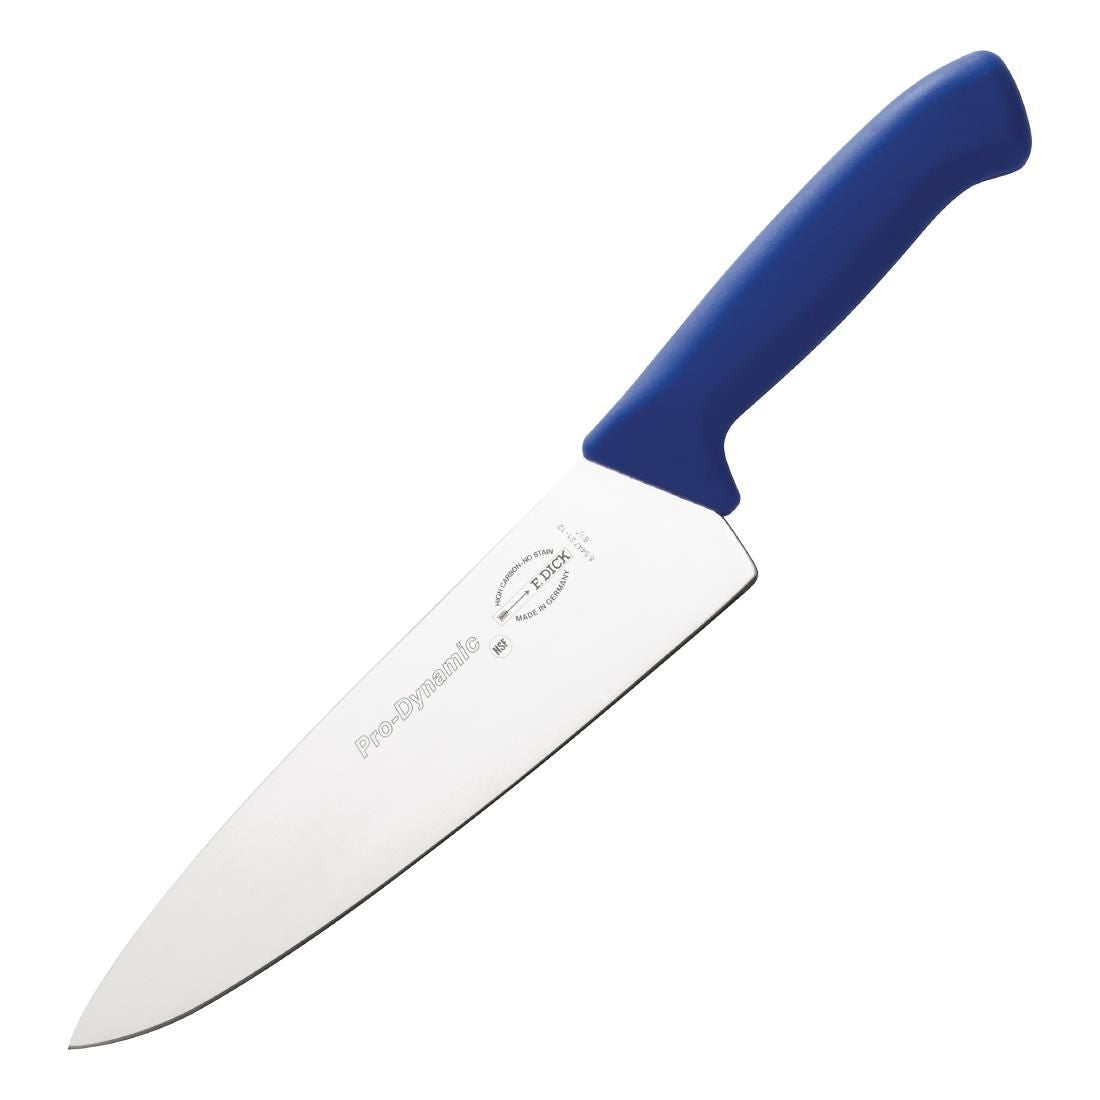 DL353 Dick Pro Dynamic HACCP Chefs Knife Blue 20.5cm JD Catering Equipment Solutions Ltd